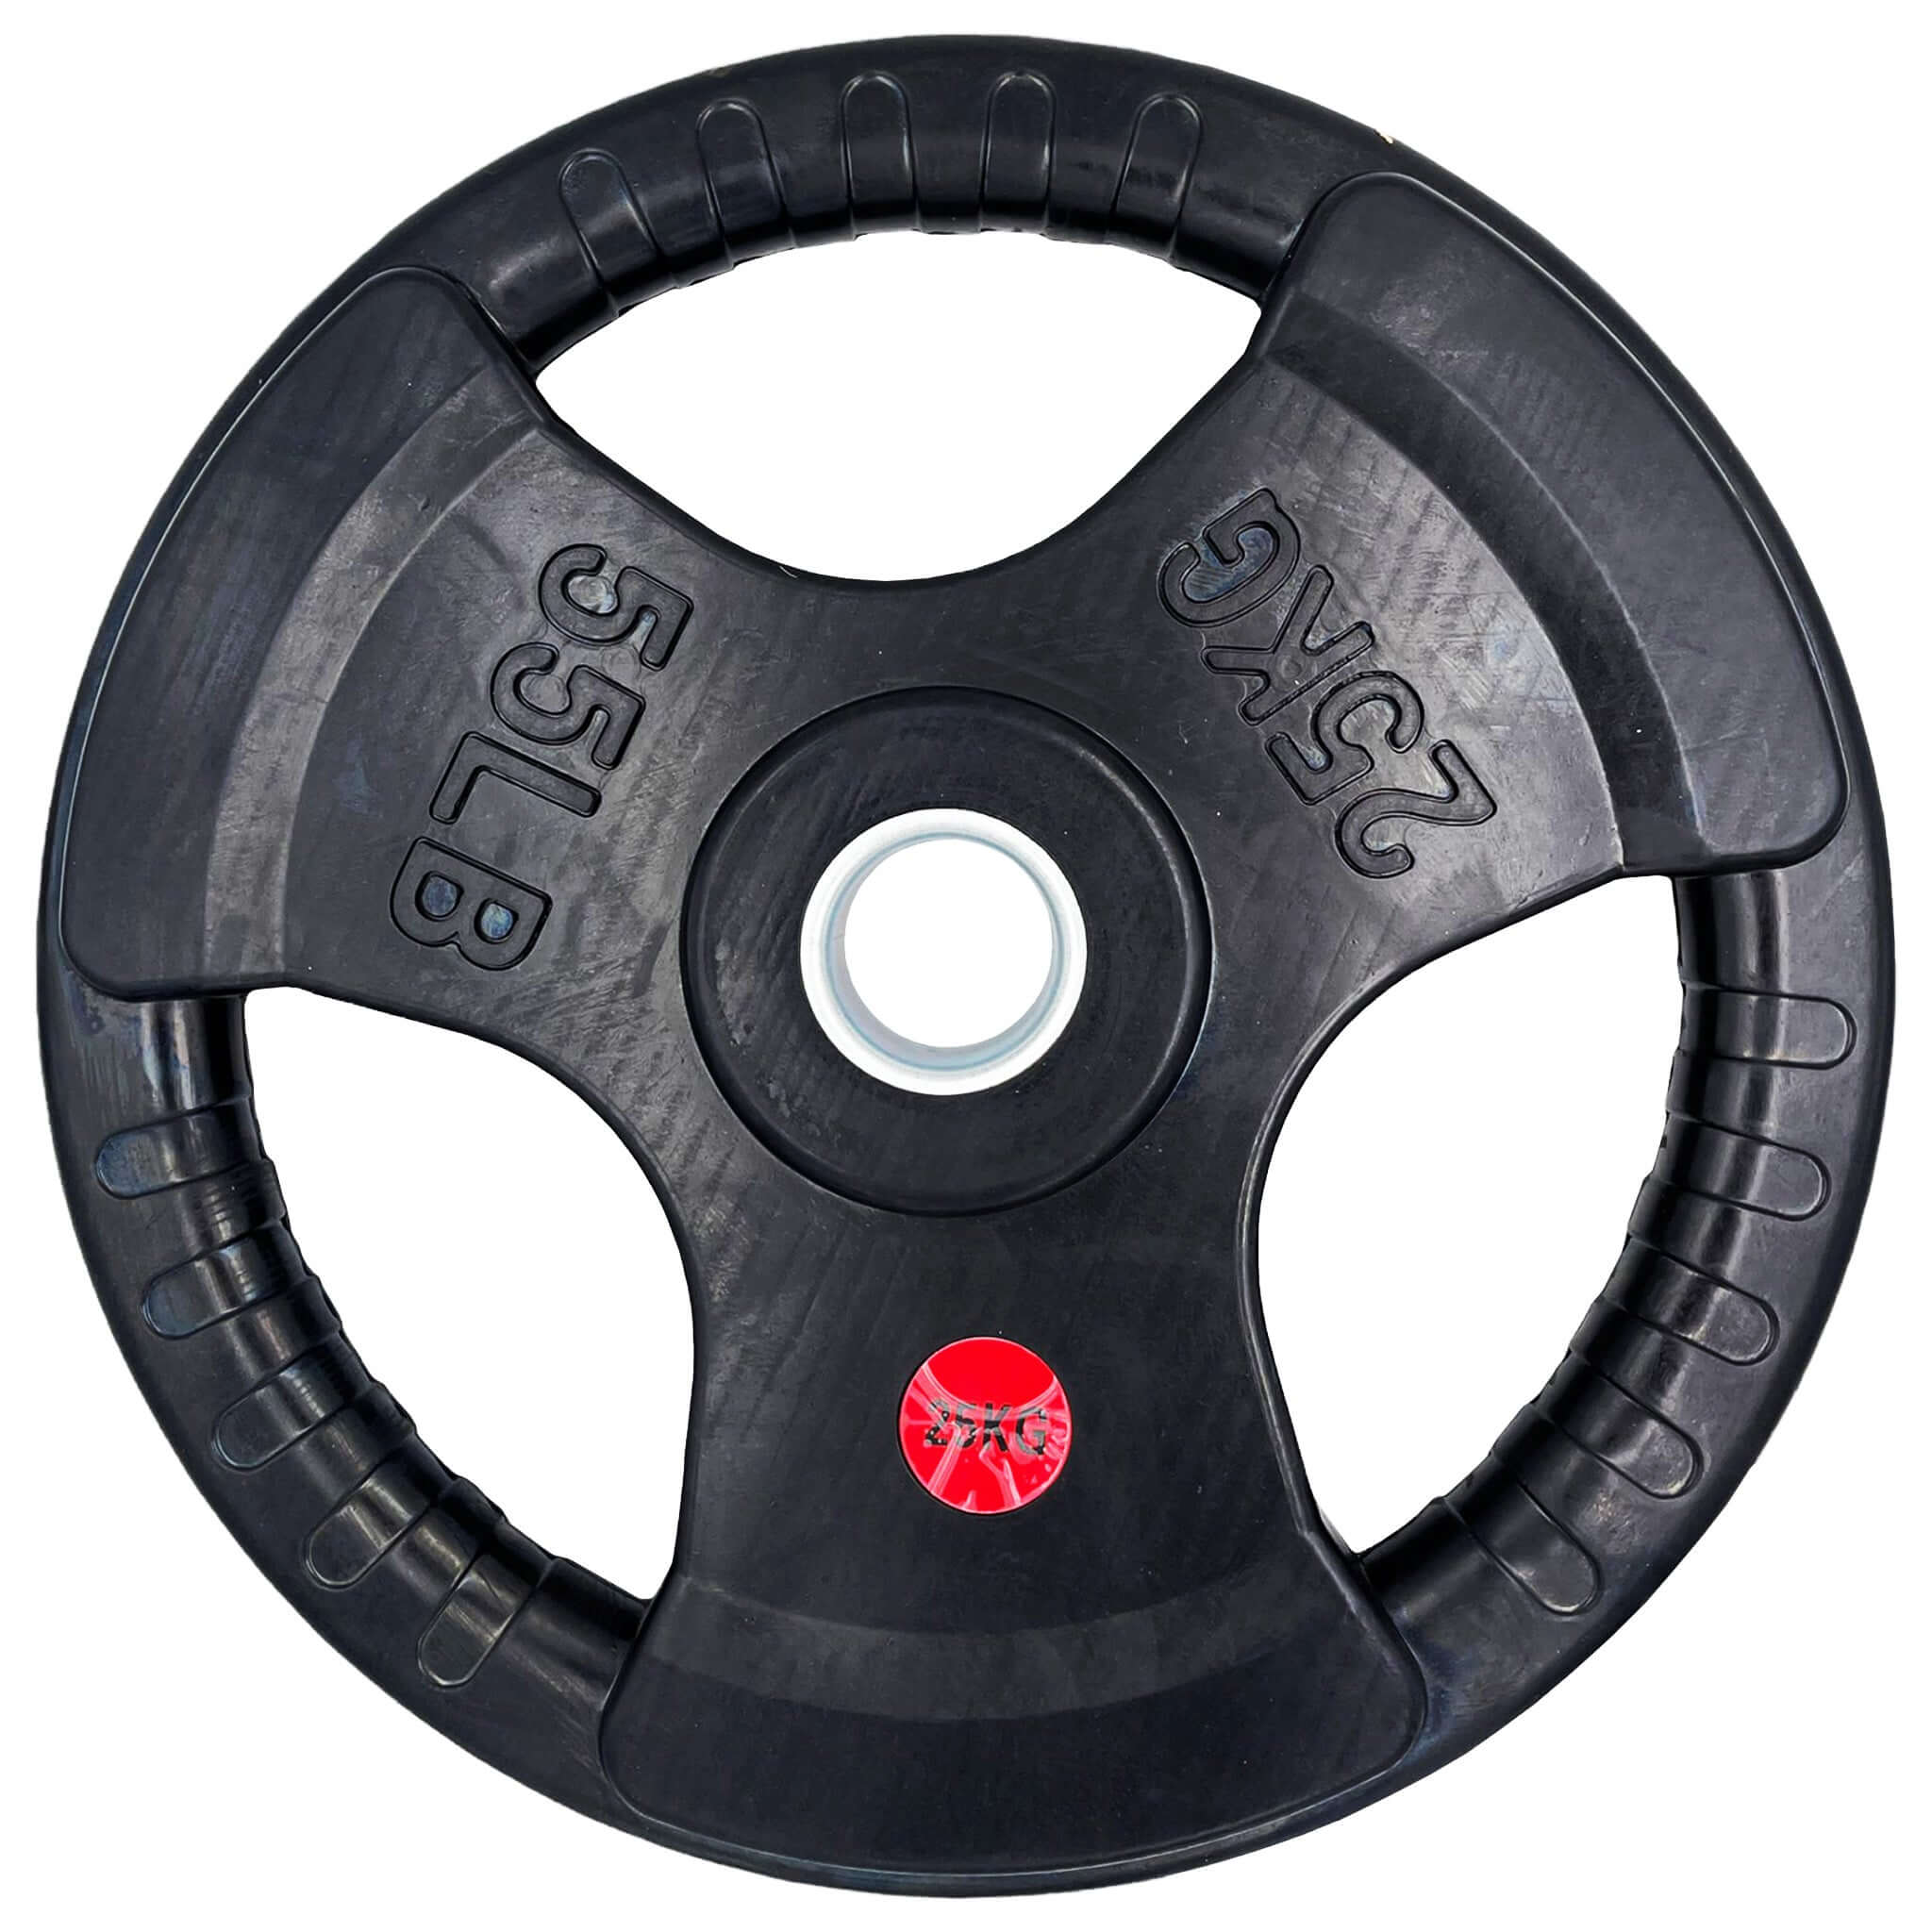 25kg Rubber Tri-grip Weight Plates Type-O Pair | INSOURCE